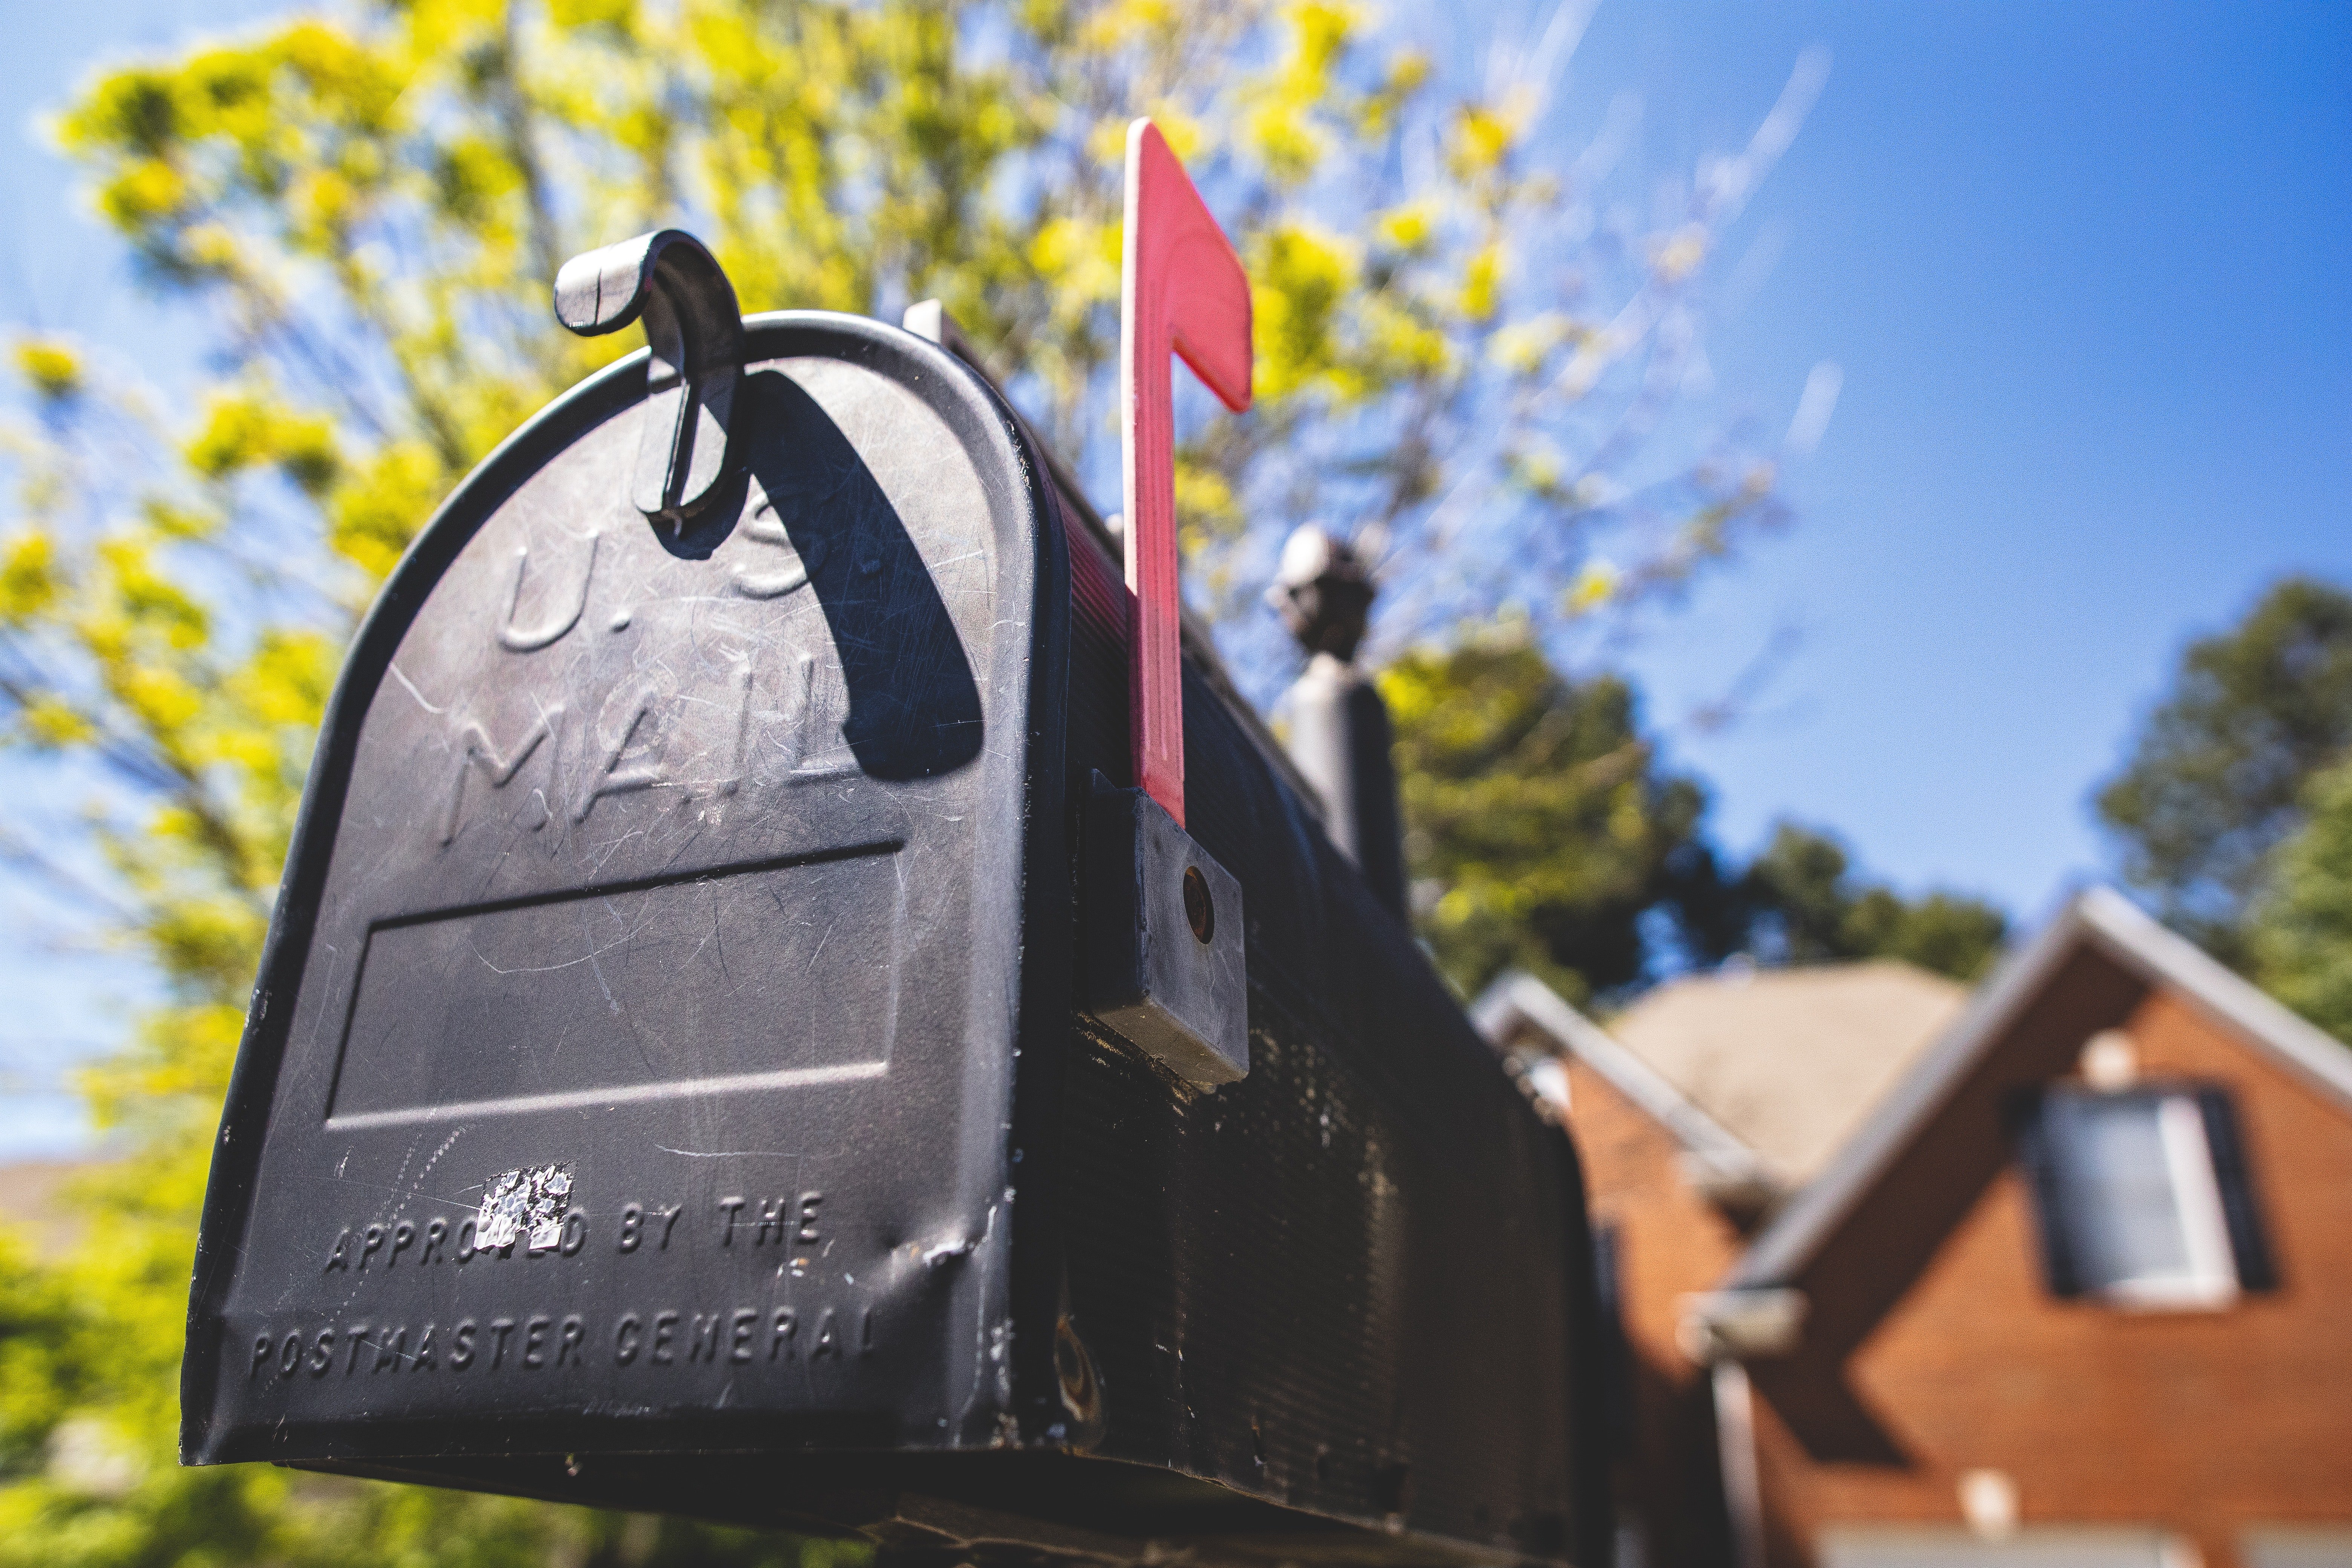 In the end, OP's customized mailbox survived all odds & taught Dick a lesson he'd never forget. | Source: Pexels